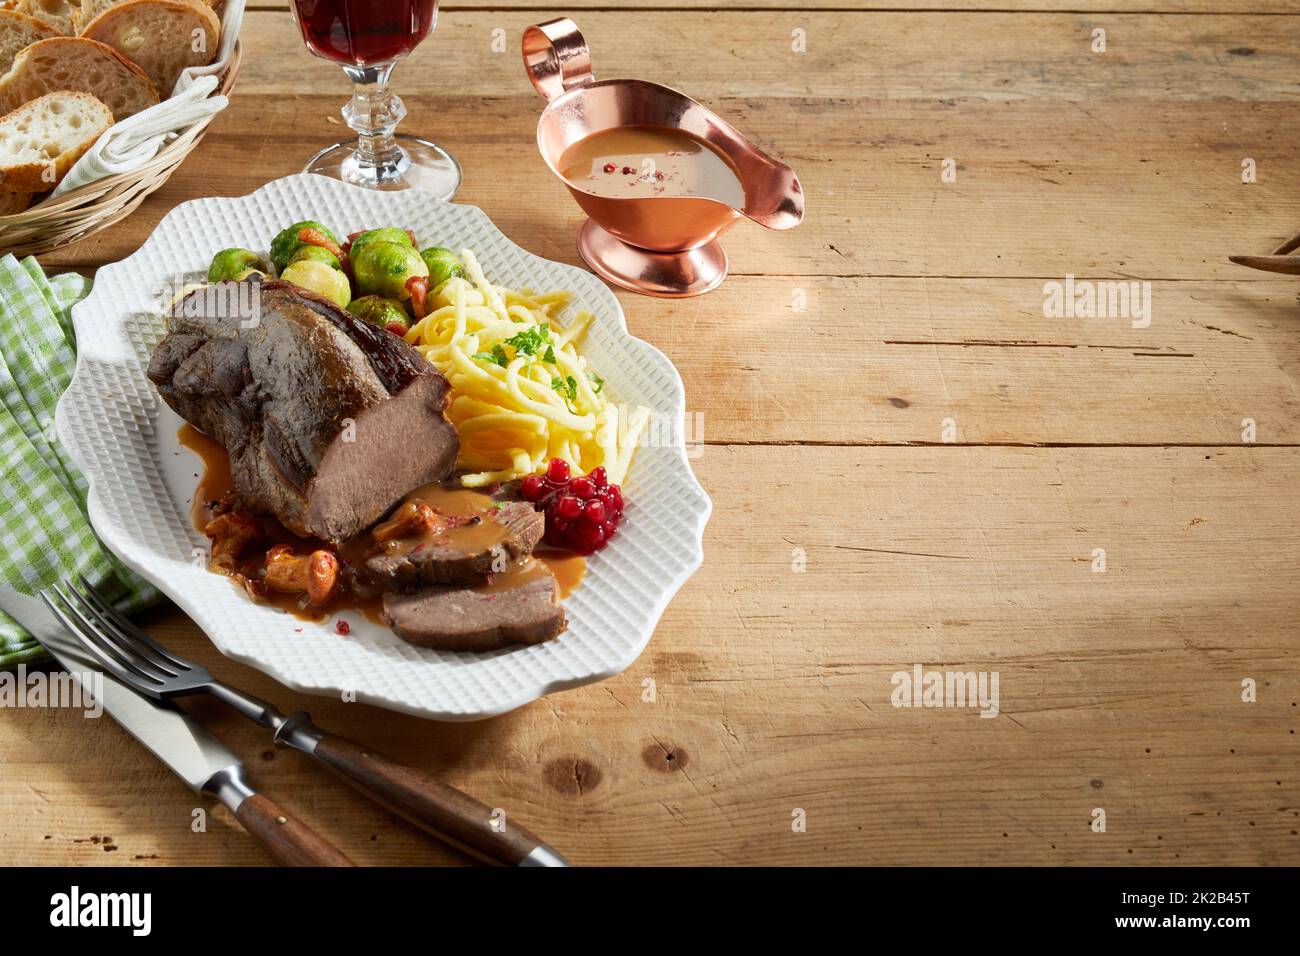 From above yummy deer venison and vegetables served on plate near sauce boat and utensils on lumber table during lunch Stock Photo